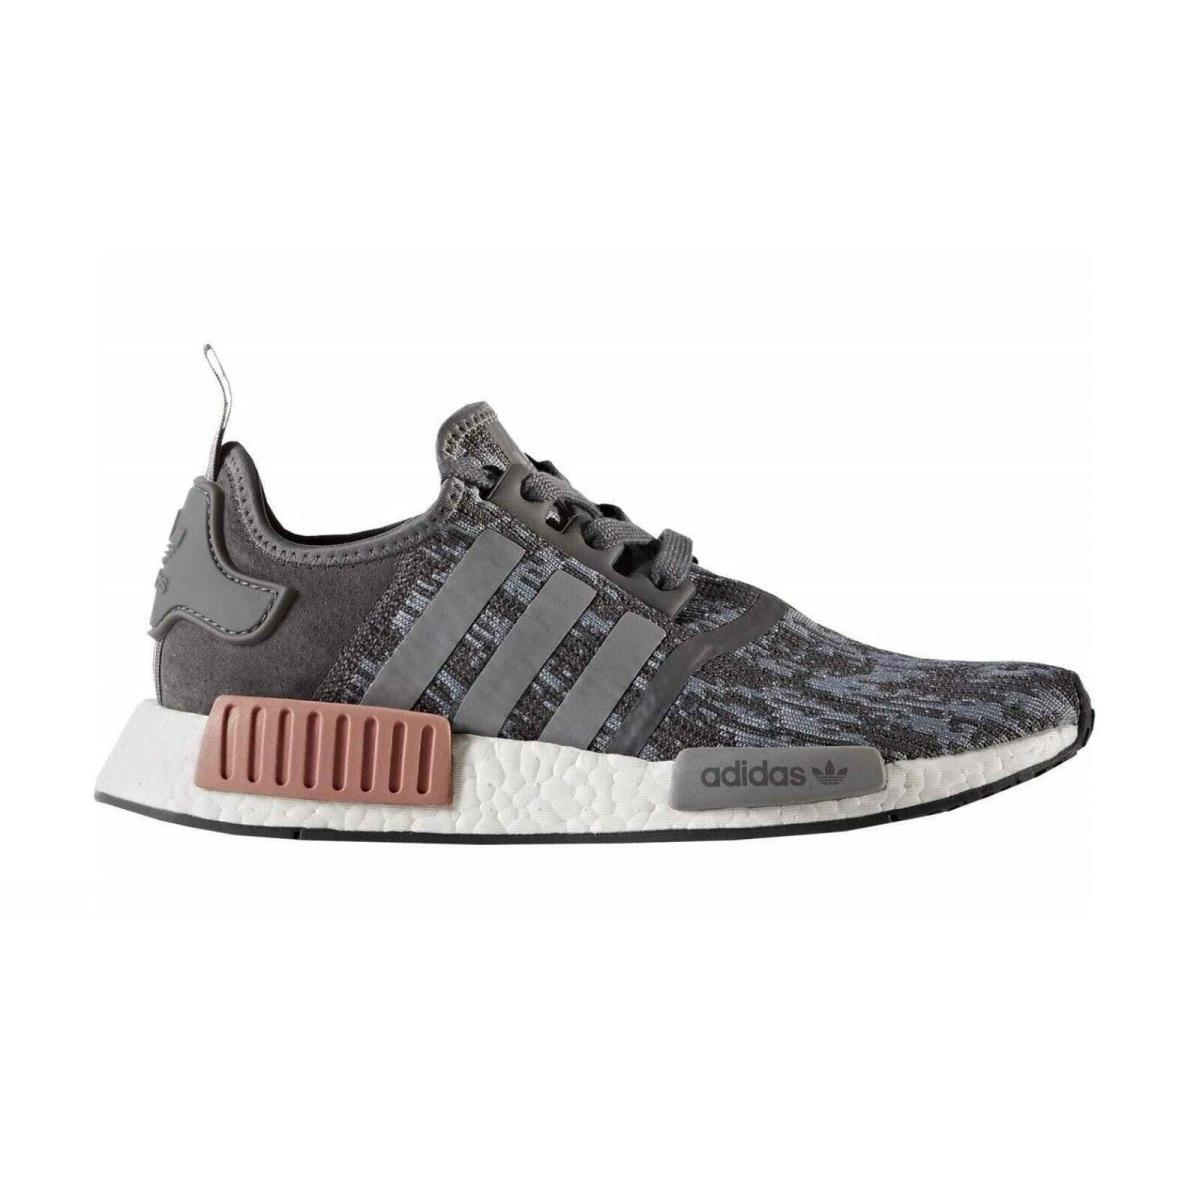 Adidas NMD_R1 W Heather Grey Raw Pink White Running BY9647 413 Women`s Shoes